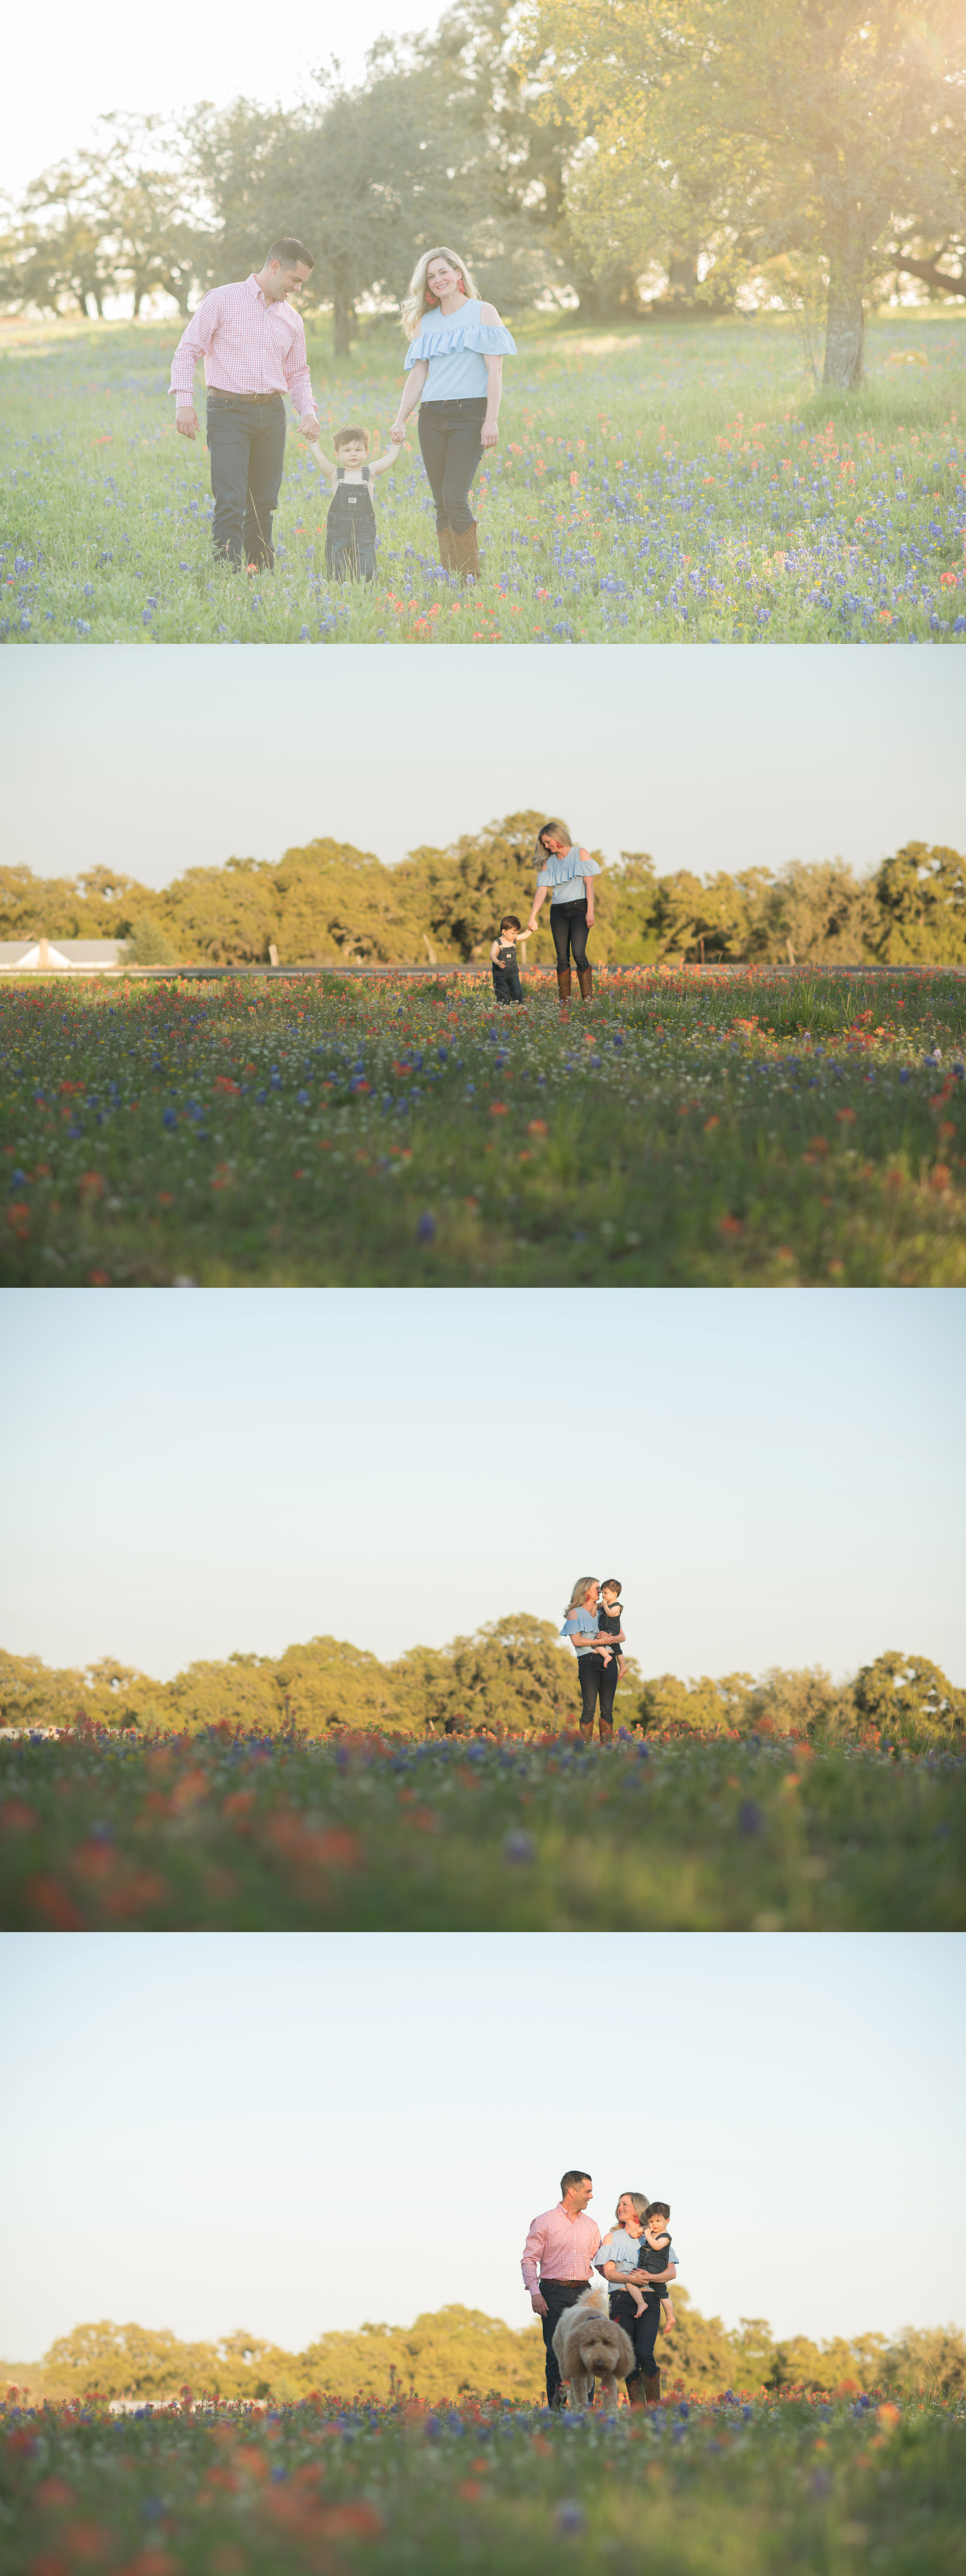 bluebonnet fun out in the country.